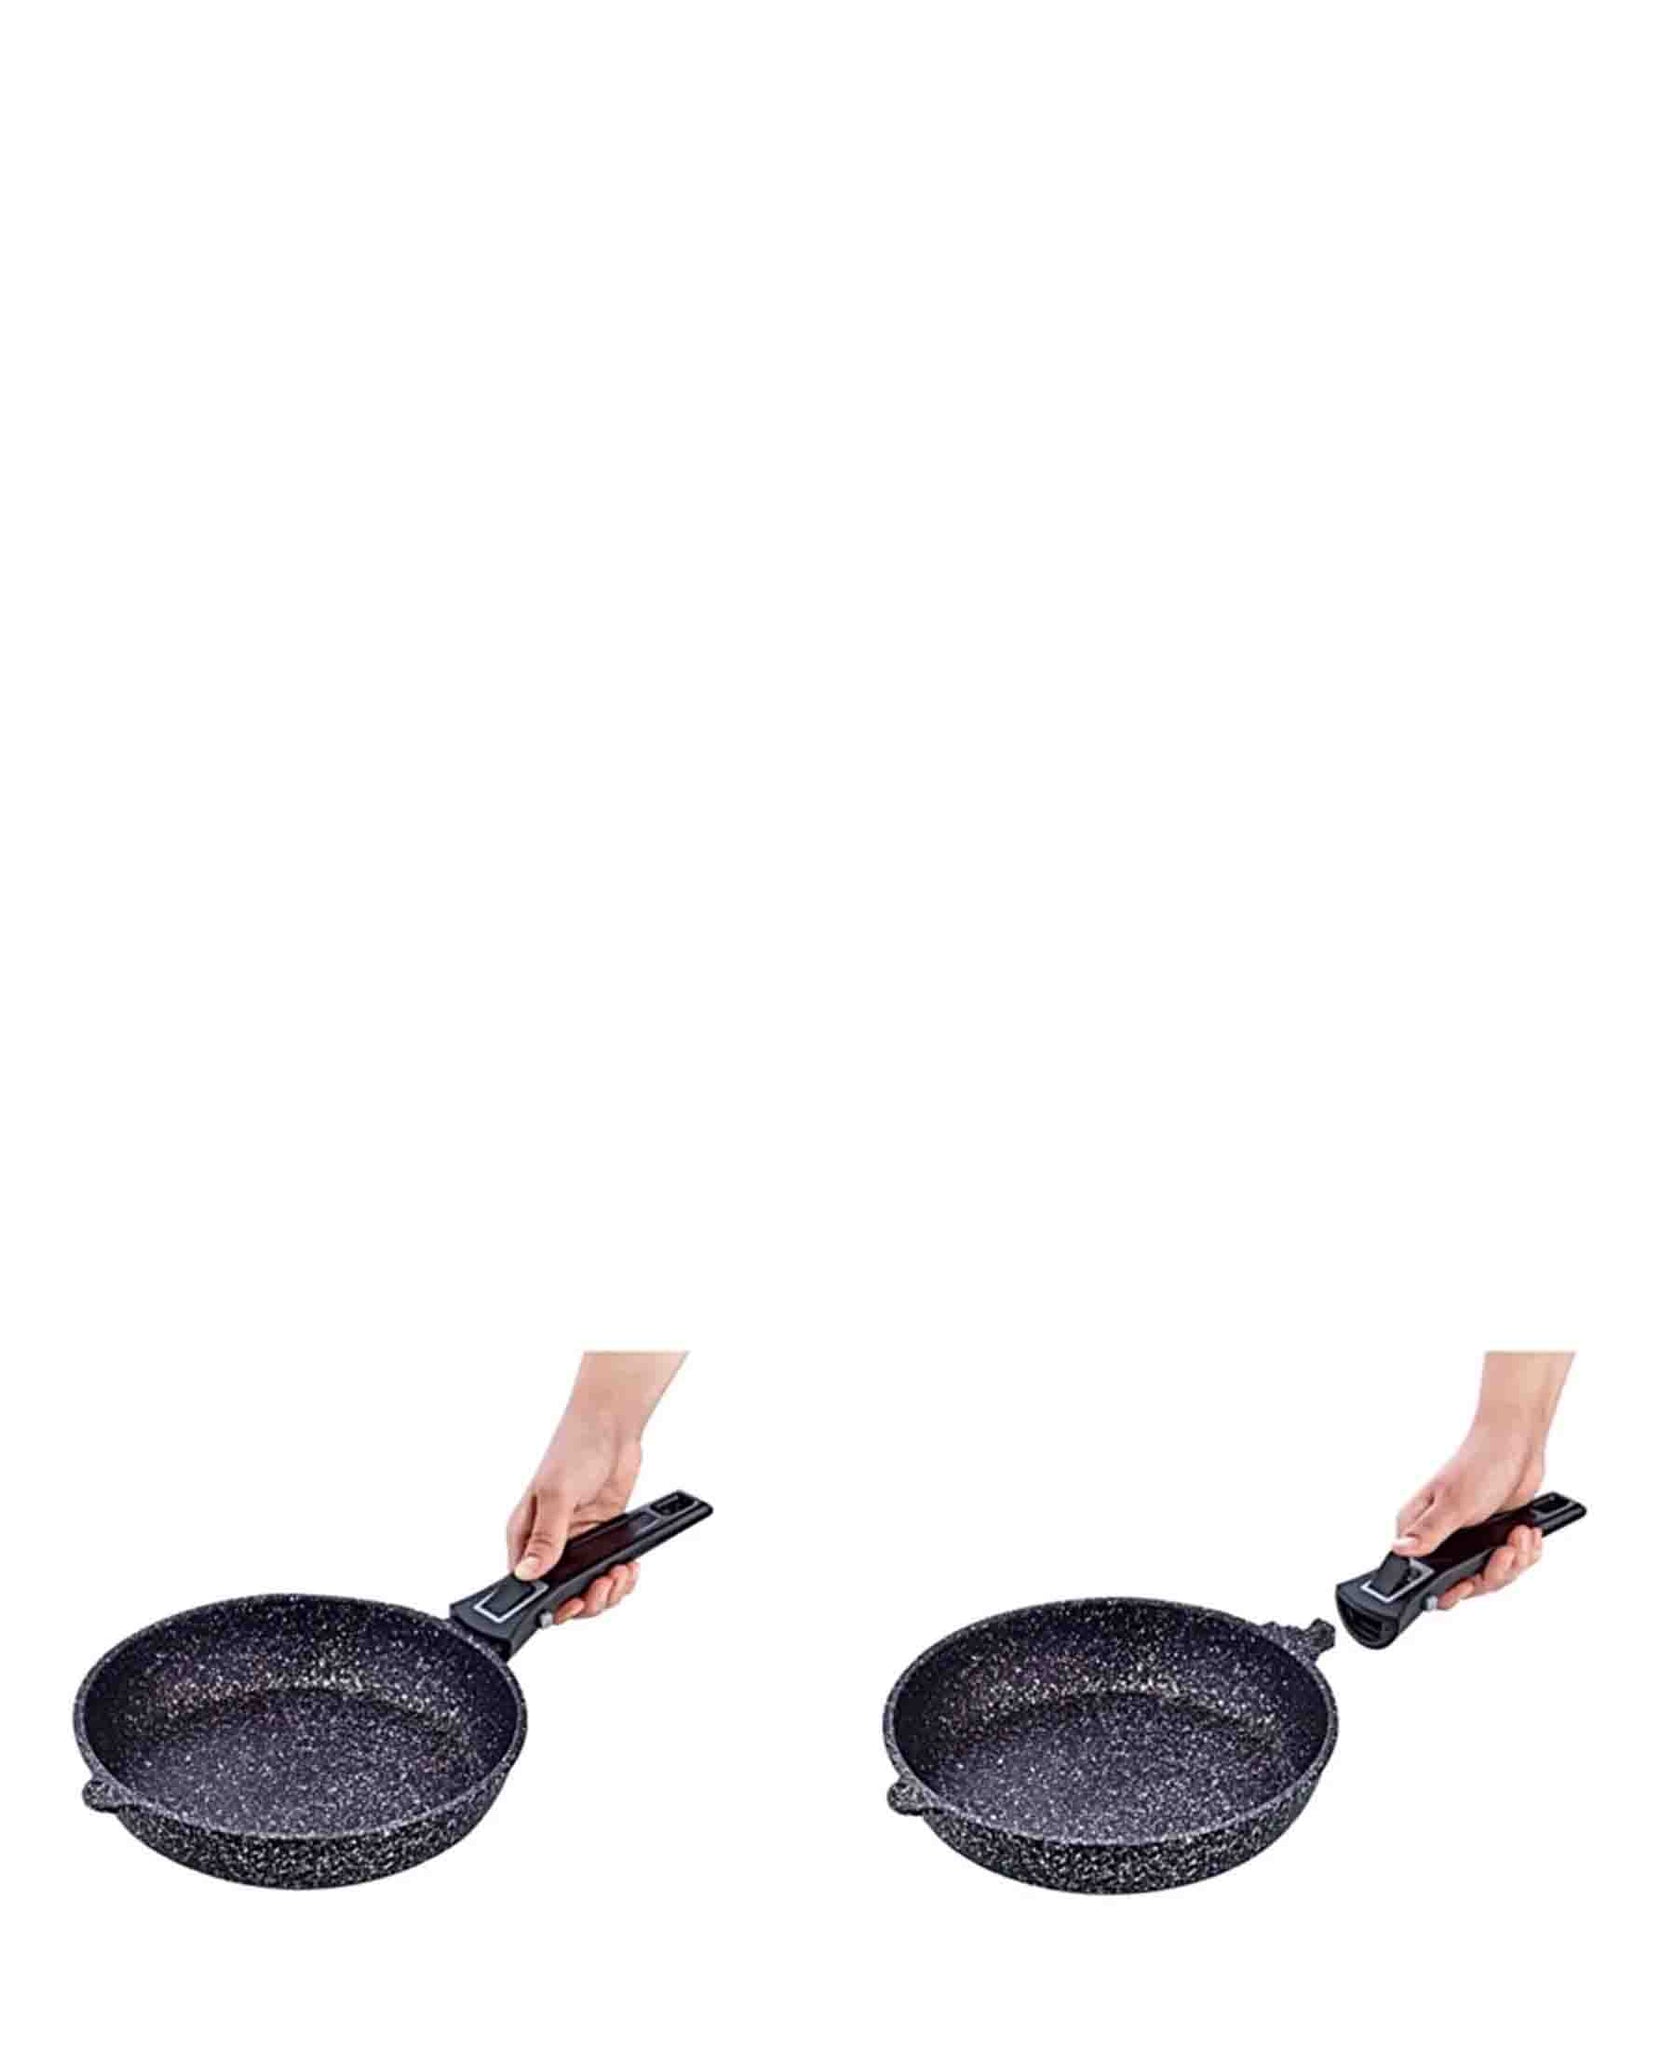 OMS 24cm Fry Pan With Removable Handles - Black